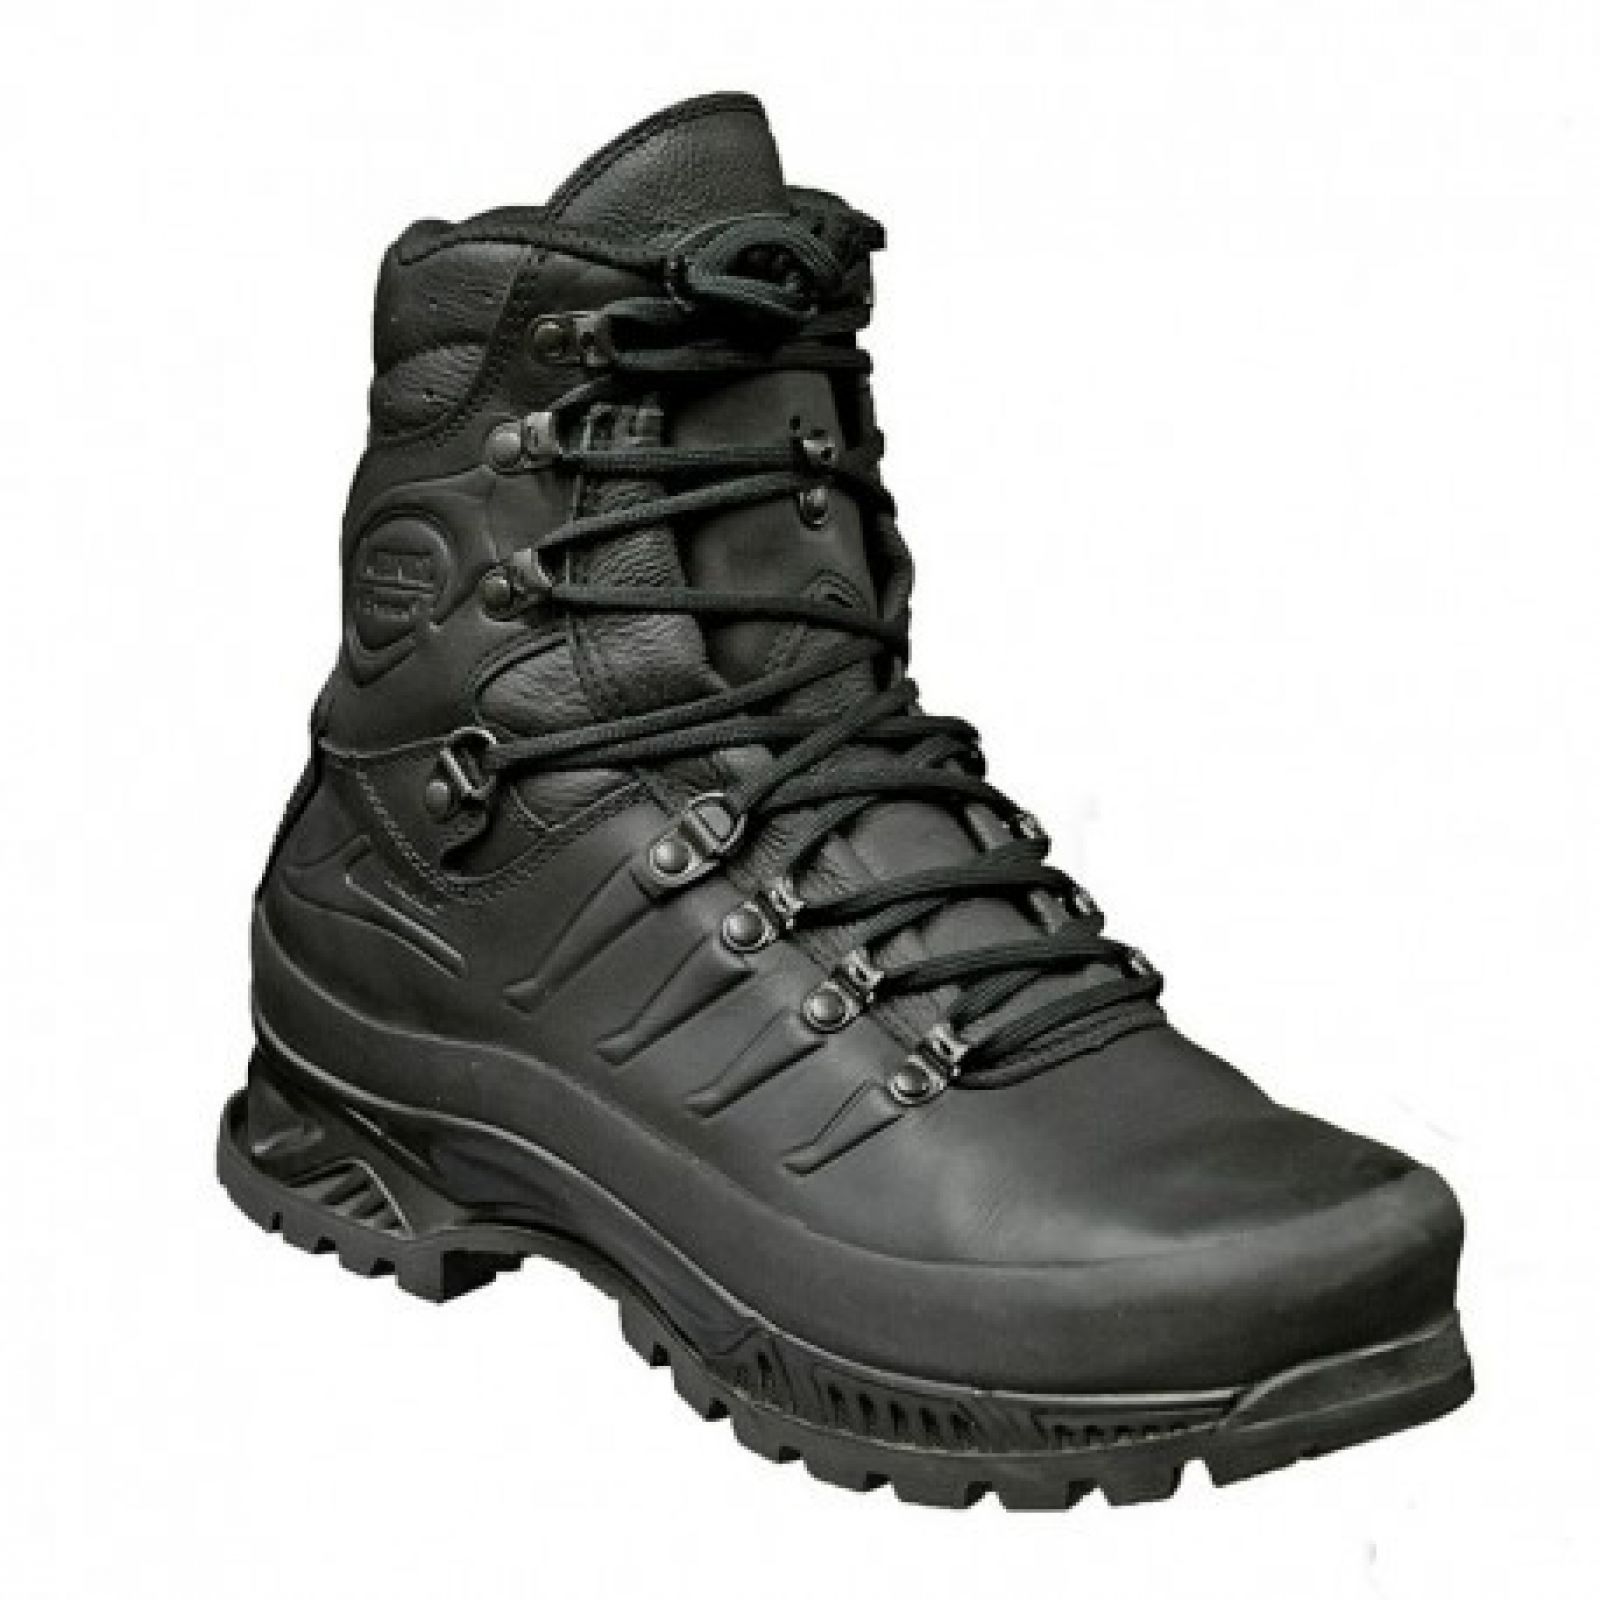 MEINDL WI12 EXTREME GORE-TEX